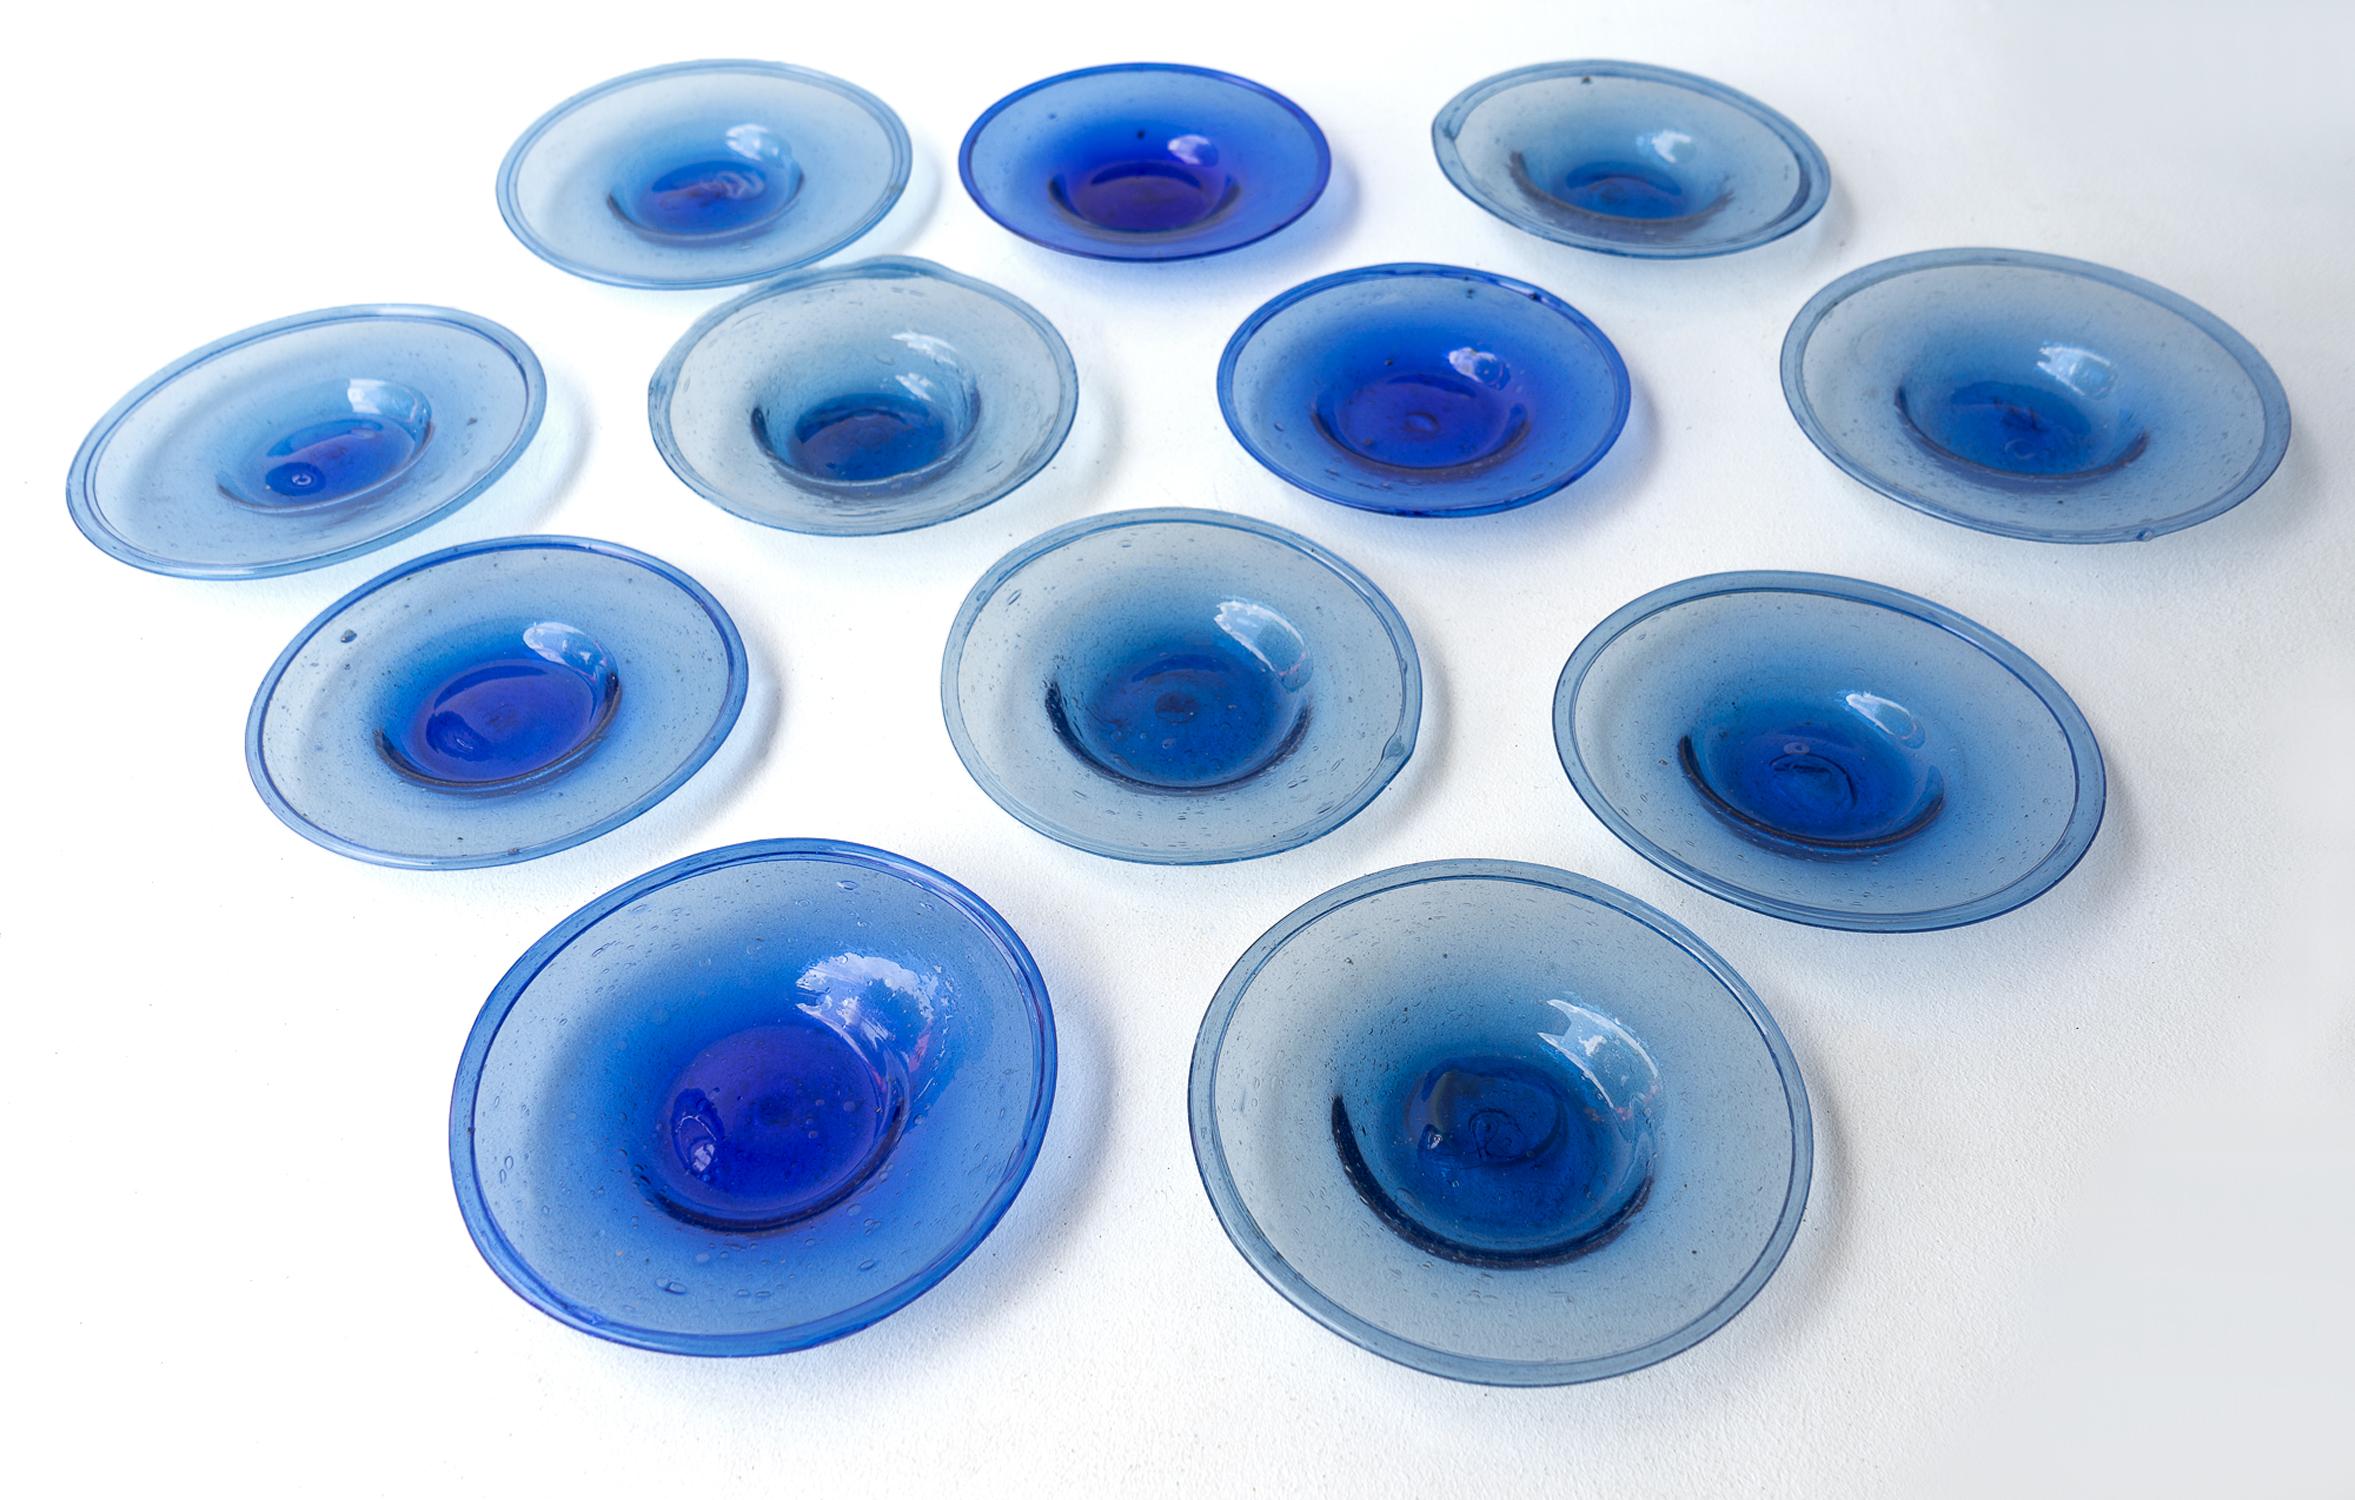 SET OF GLASS DISHES

Each is individually hand blown and unique, slightly varying in colour shape and thickness.

Rich cobalt blue colour with bubble inclusions.

Rough pontil mark underneath.

Unsigned but in the manner of Biot.

They are in great